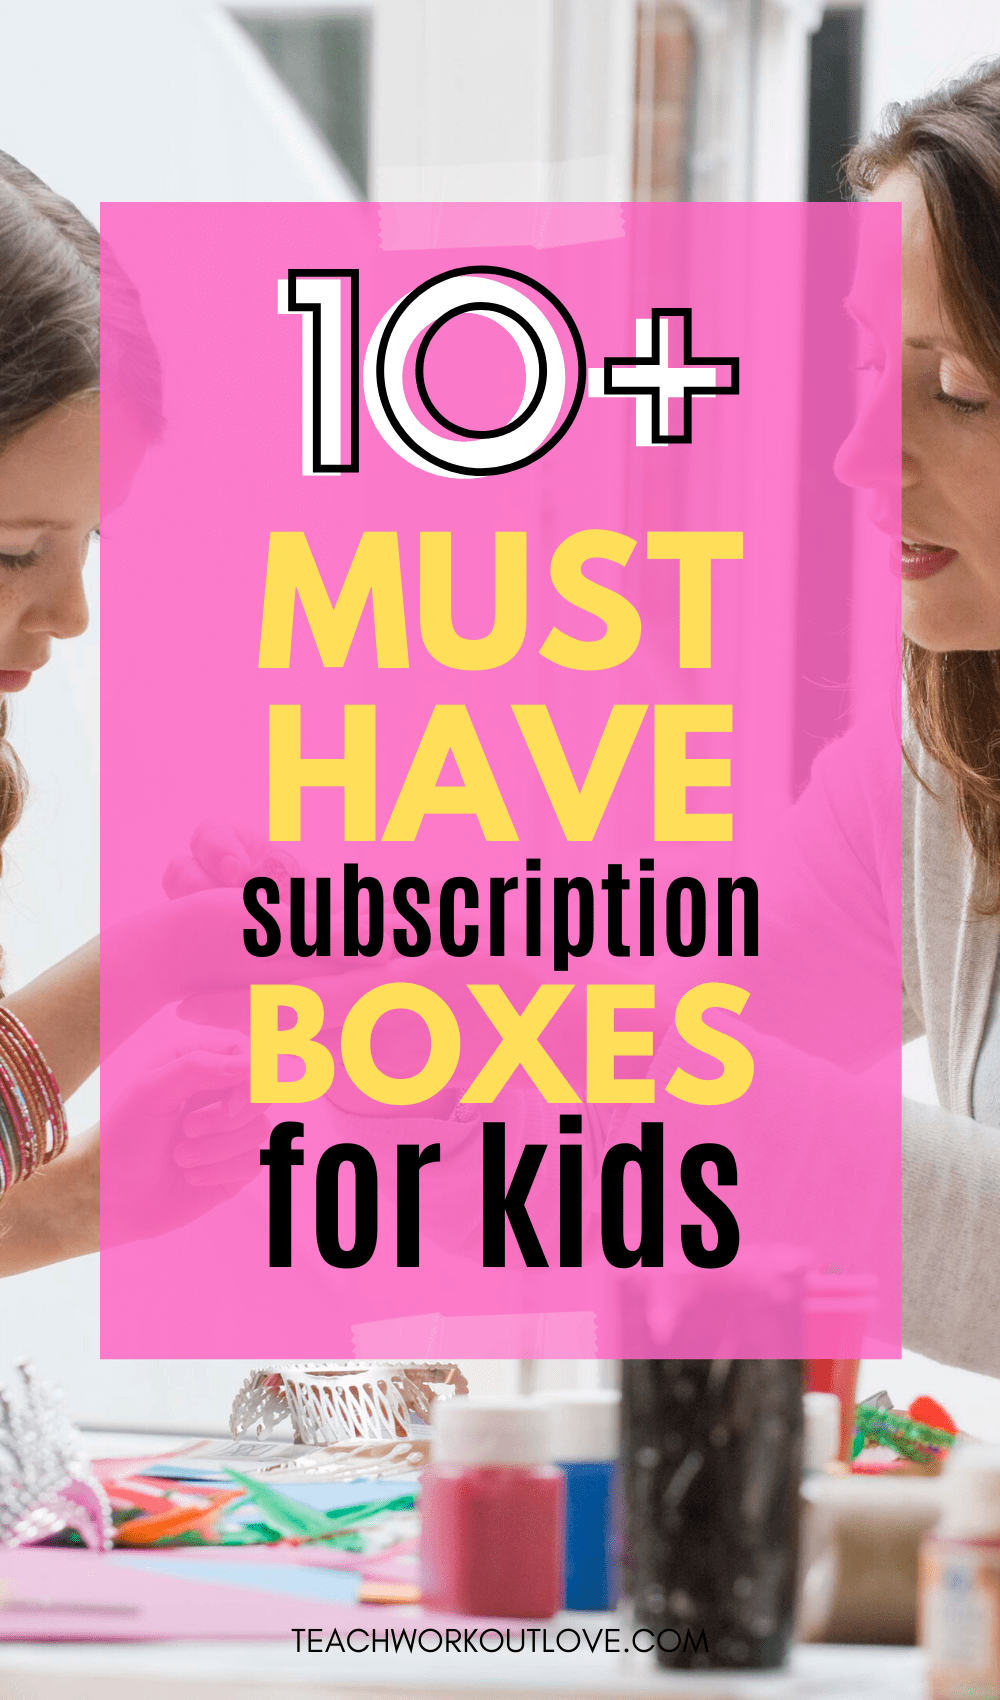 Are you stuck at home and running out of fun ideas? We have answers! Here are 10+ subscription boxes that are perfect for families stuck at home!